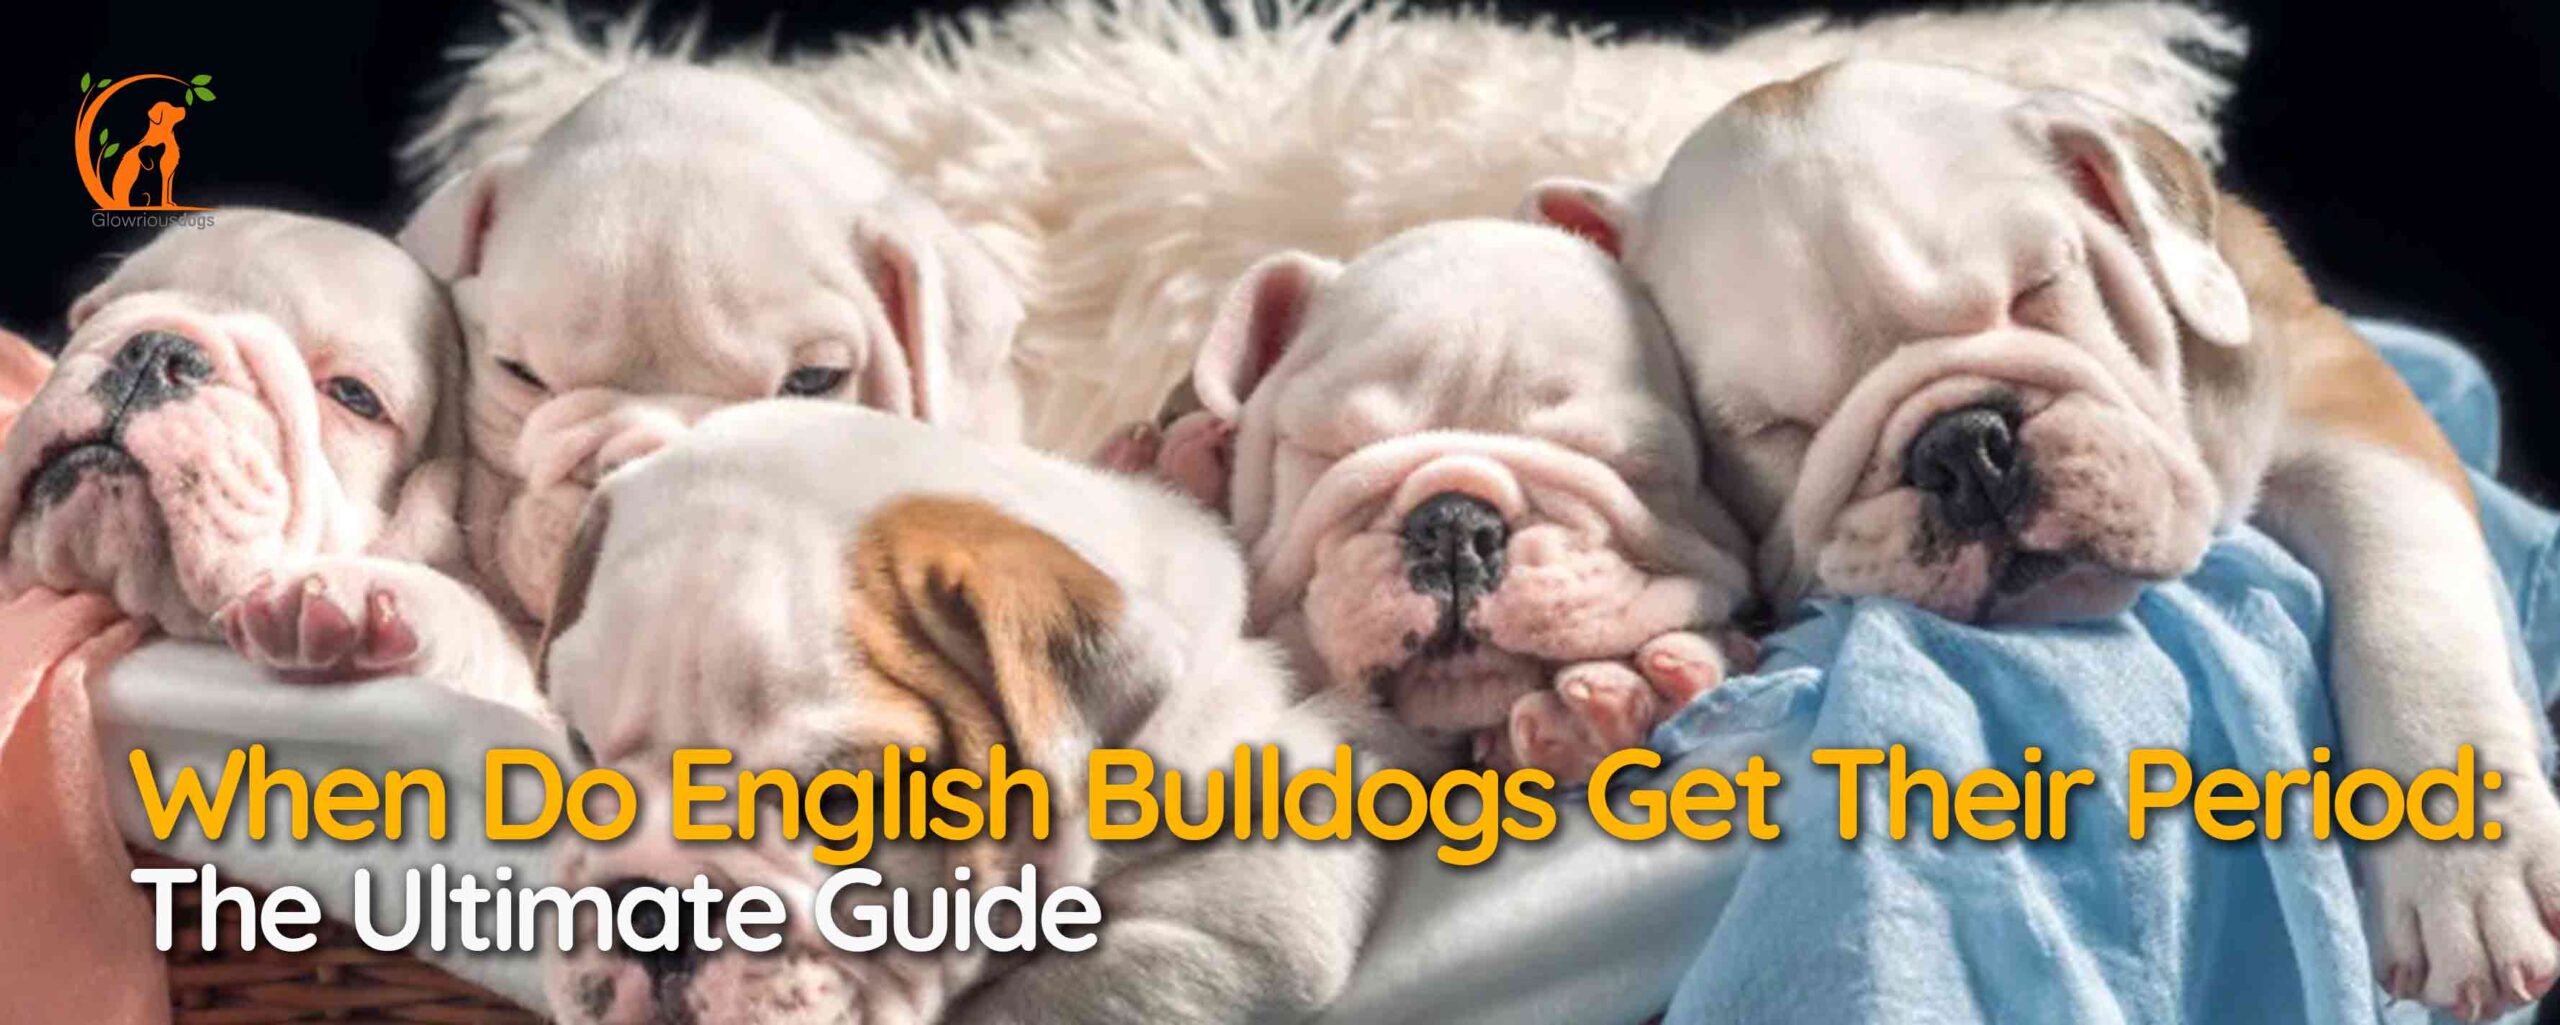 When Do English Bulldogs Get Their Period: The Ultimate Guide